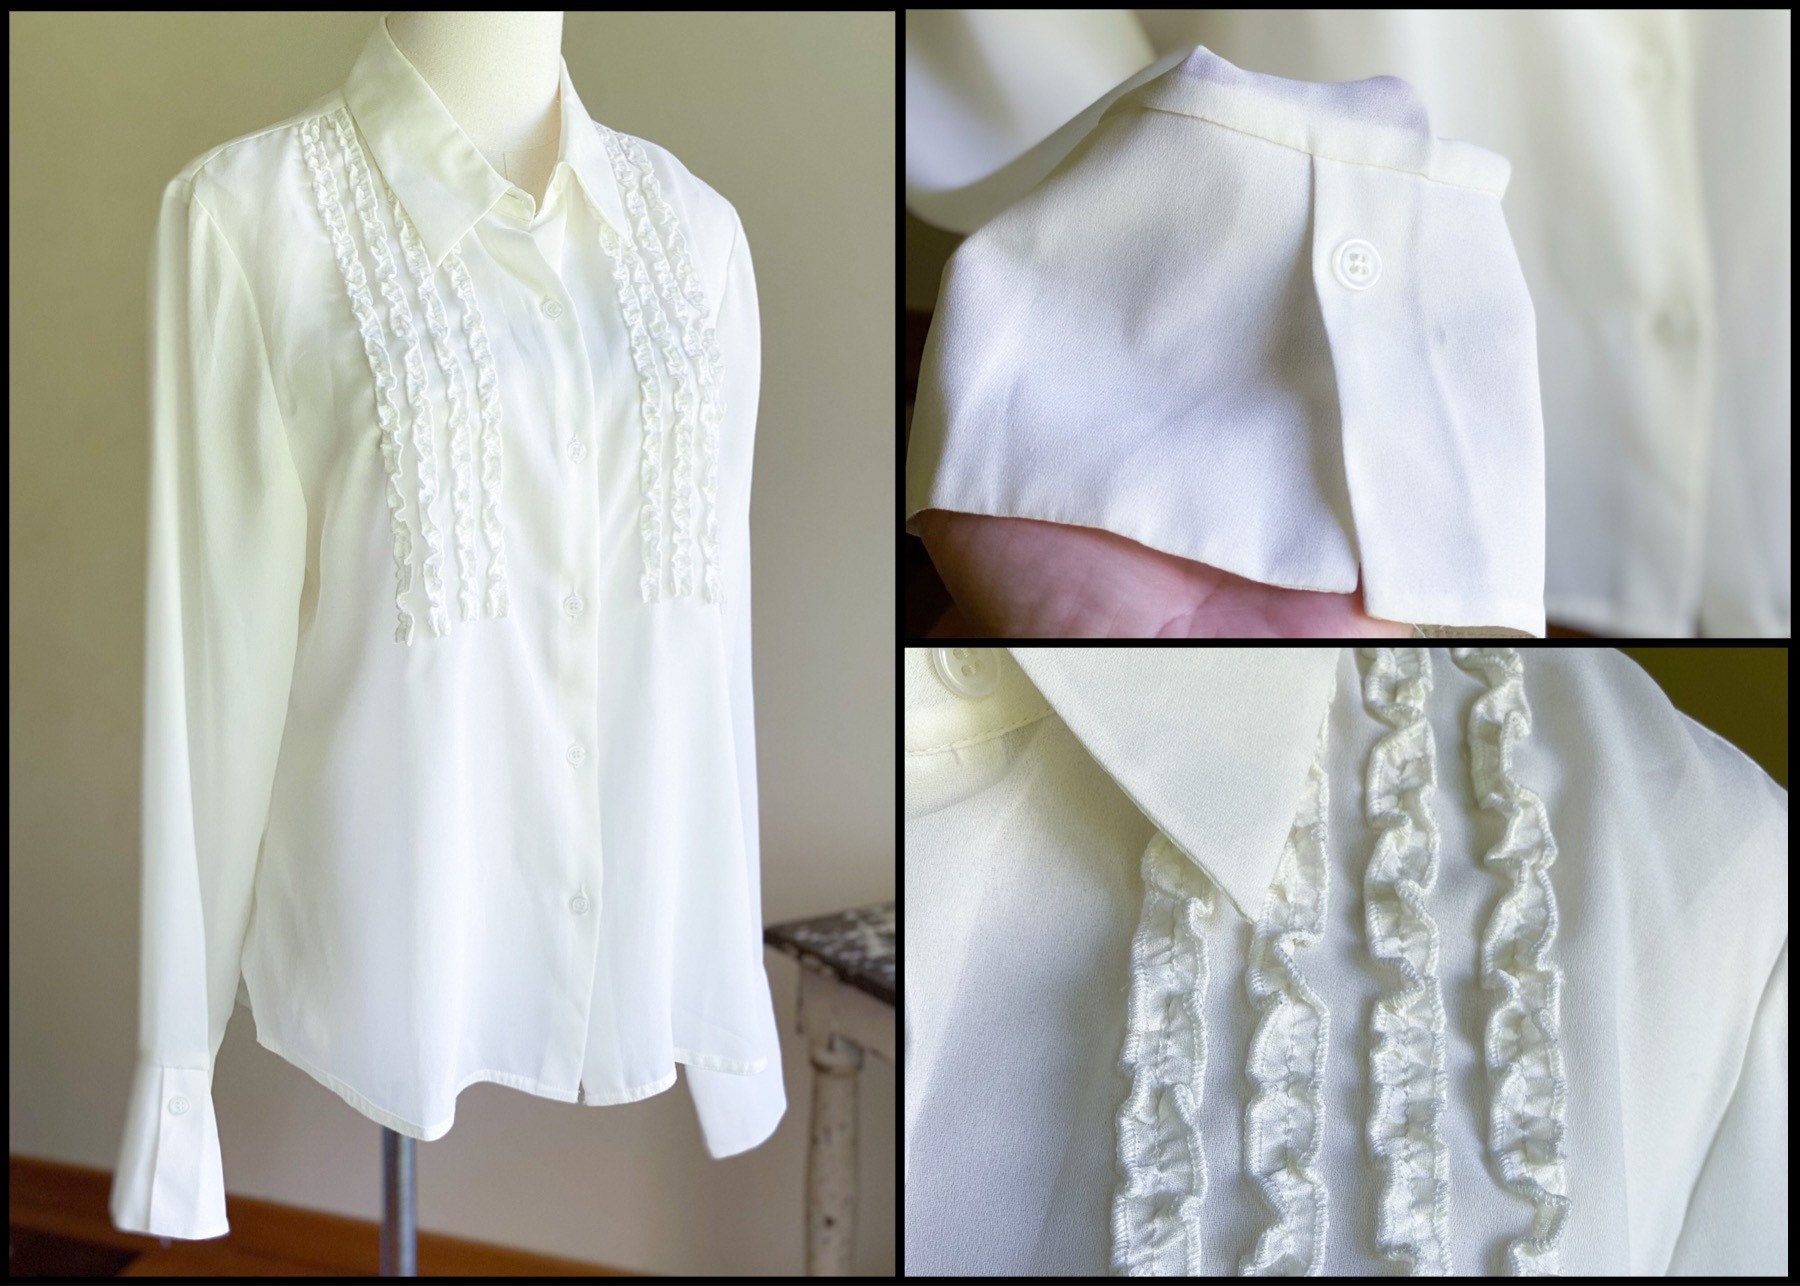 Vintage CHANEL Silk Tuxedo Blouse With Bow and 4-leaf Clover 